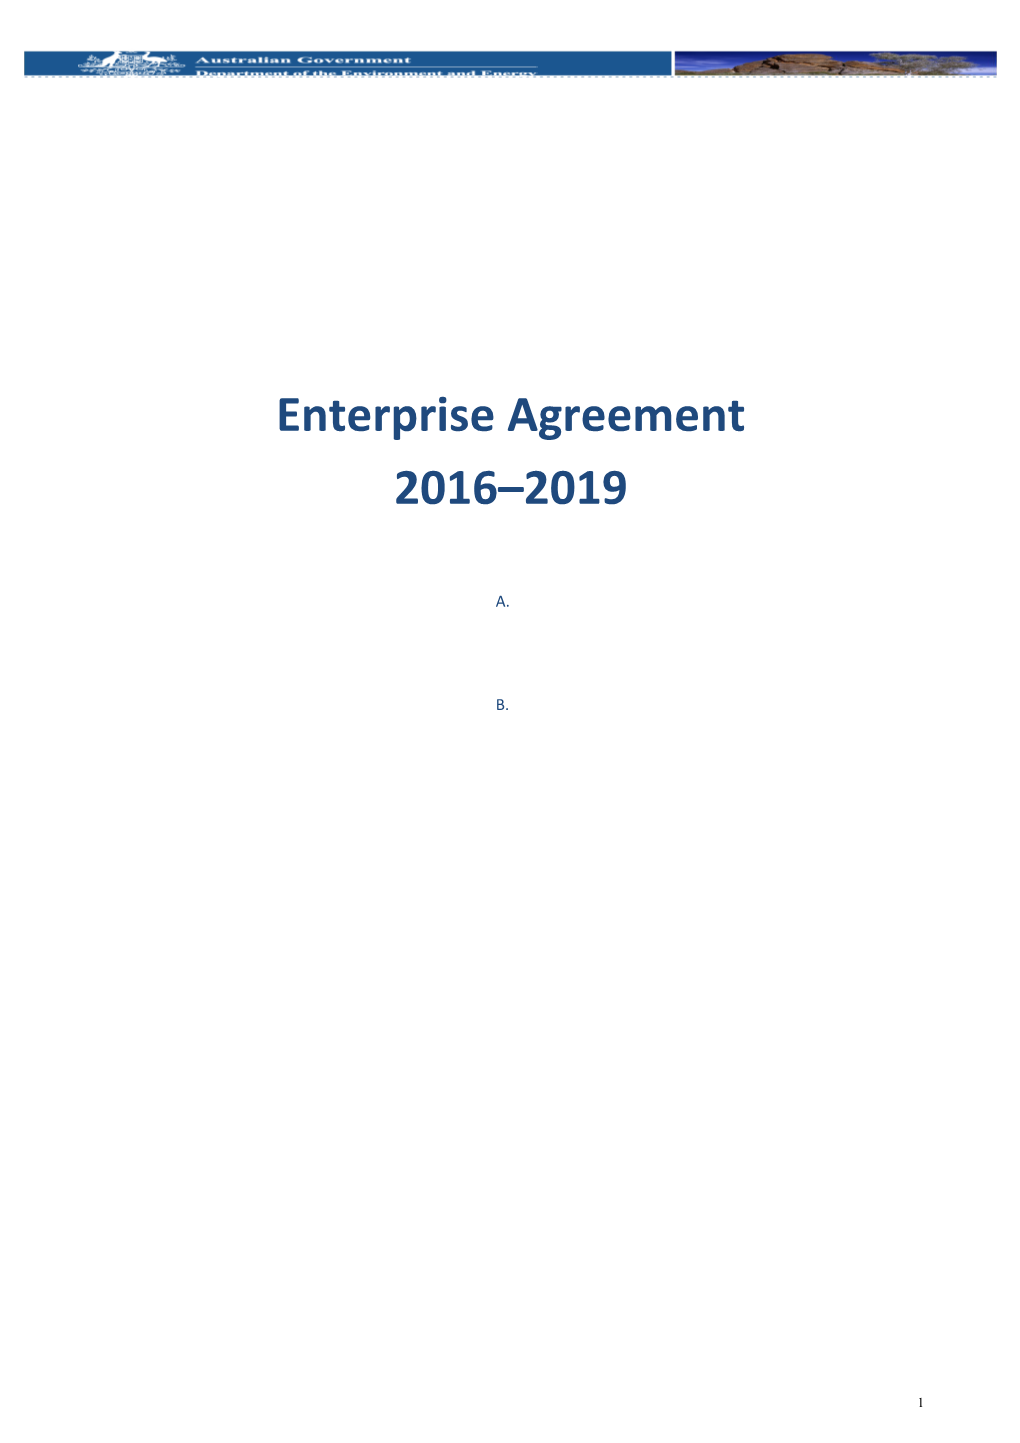 Department of the Environment and Energy Enterprise Agreement 2016-2019